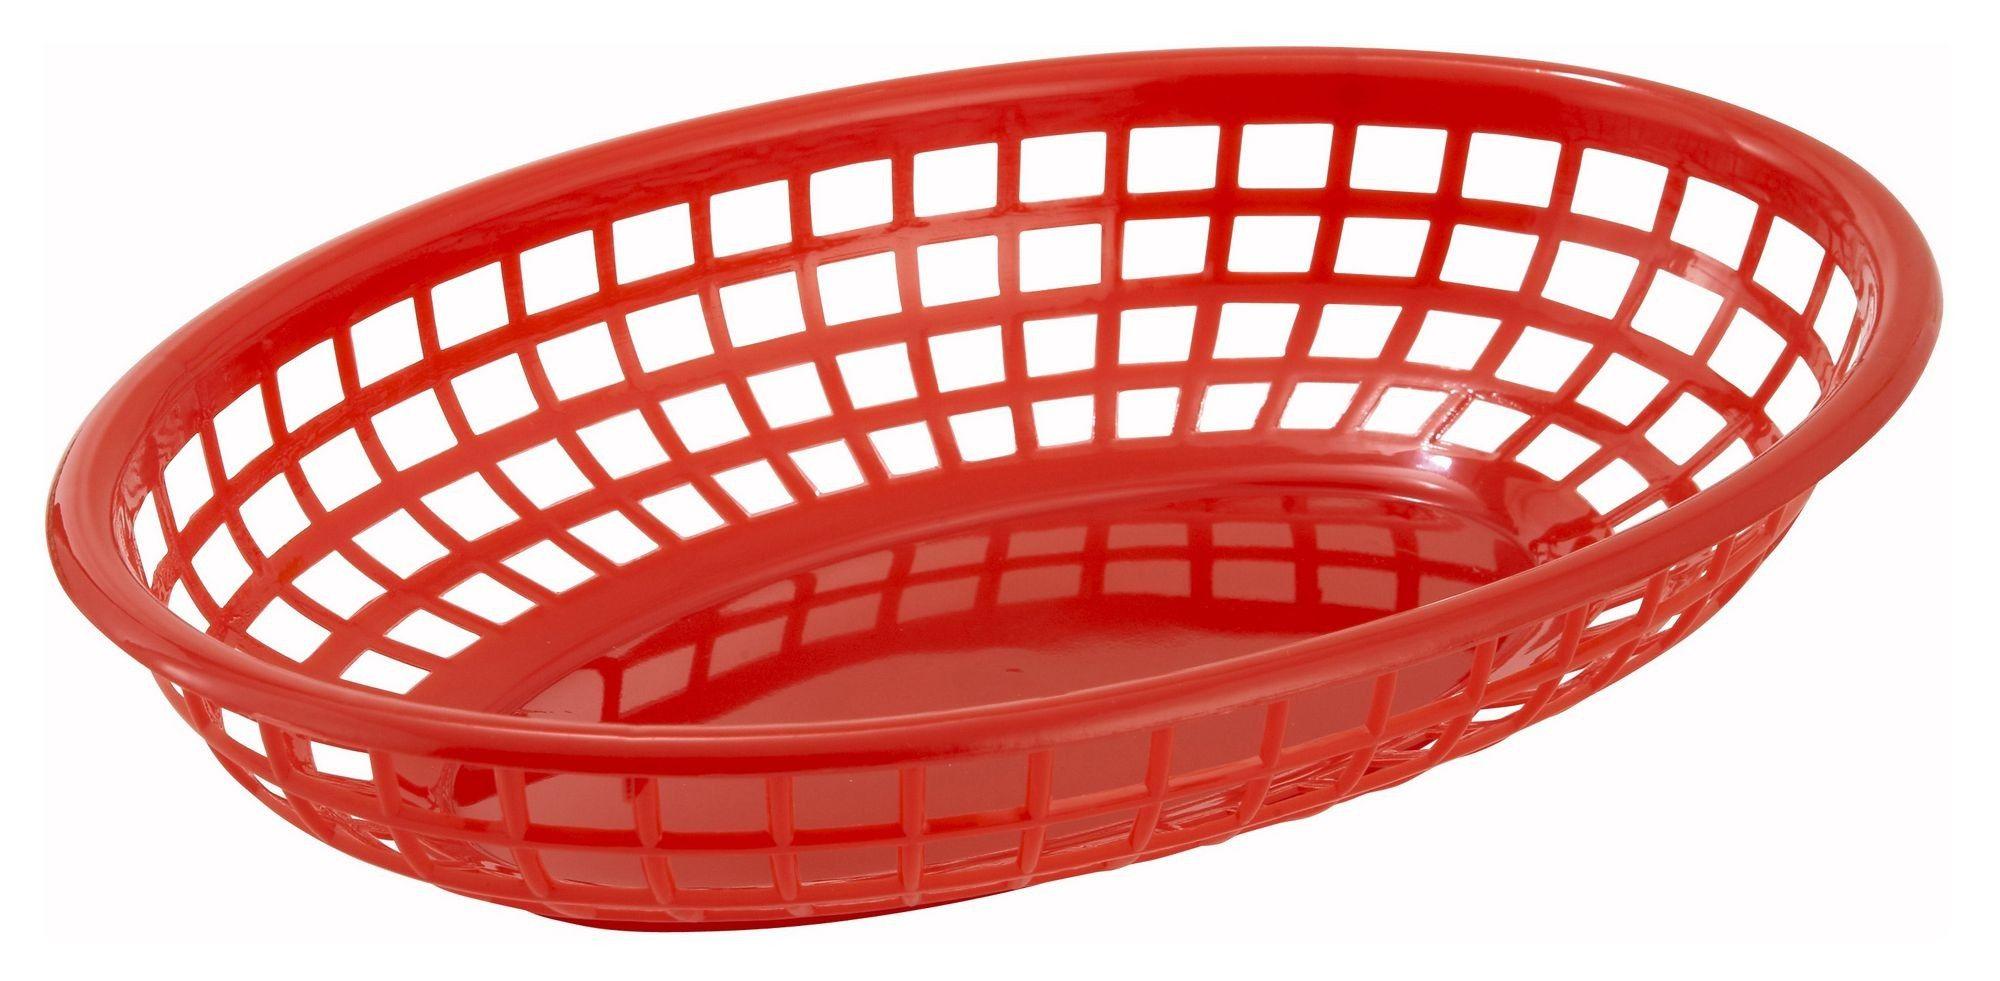 Food with Red Oval Logo - Red Oval Plastic Fast Food Basket 1 2